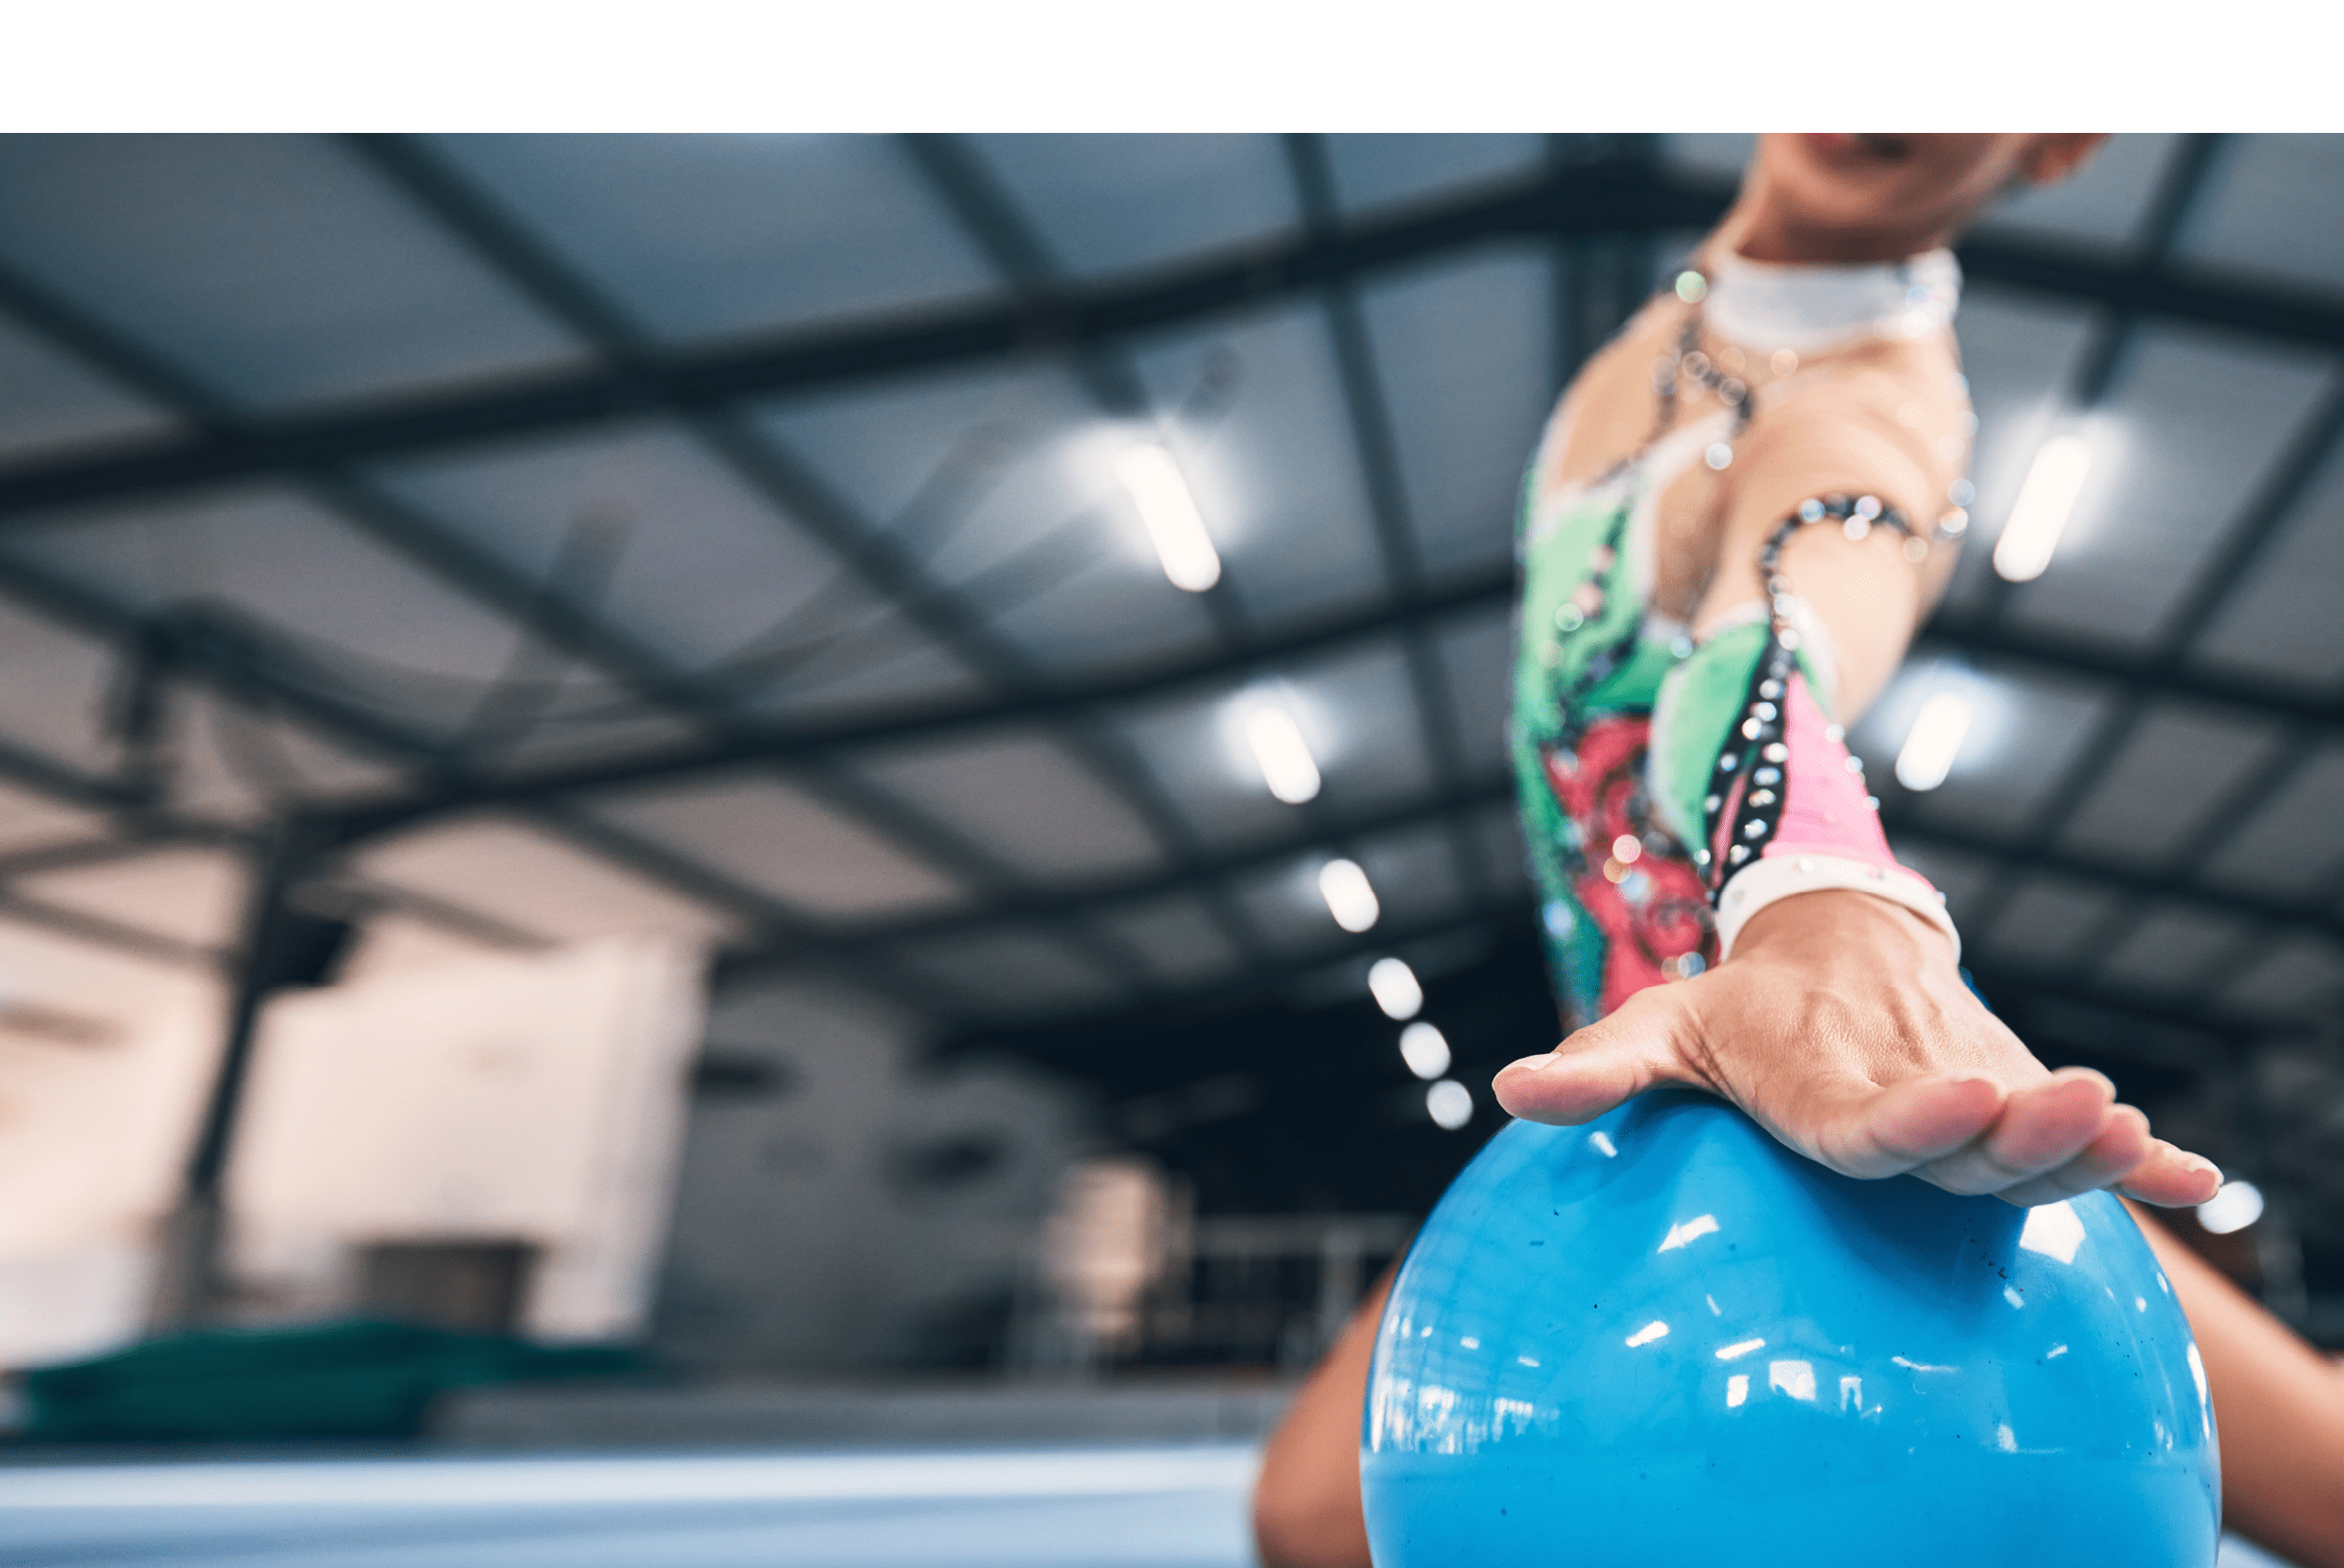 Woman hands, gymnastics and ball for performance, elegant training and dancer in sports arena. Closeup female, rhythmic movement and dancing for creative talent, solo concert and agility in action